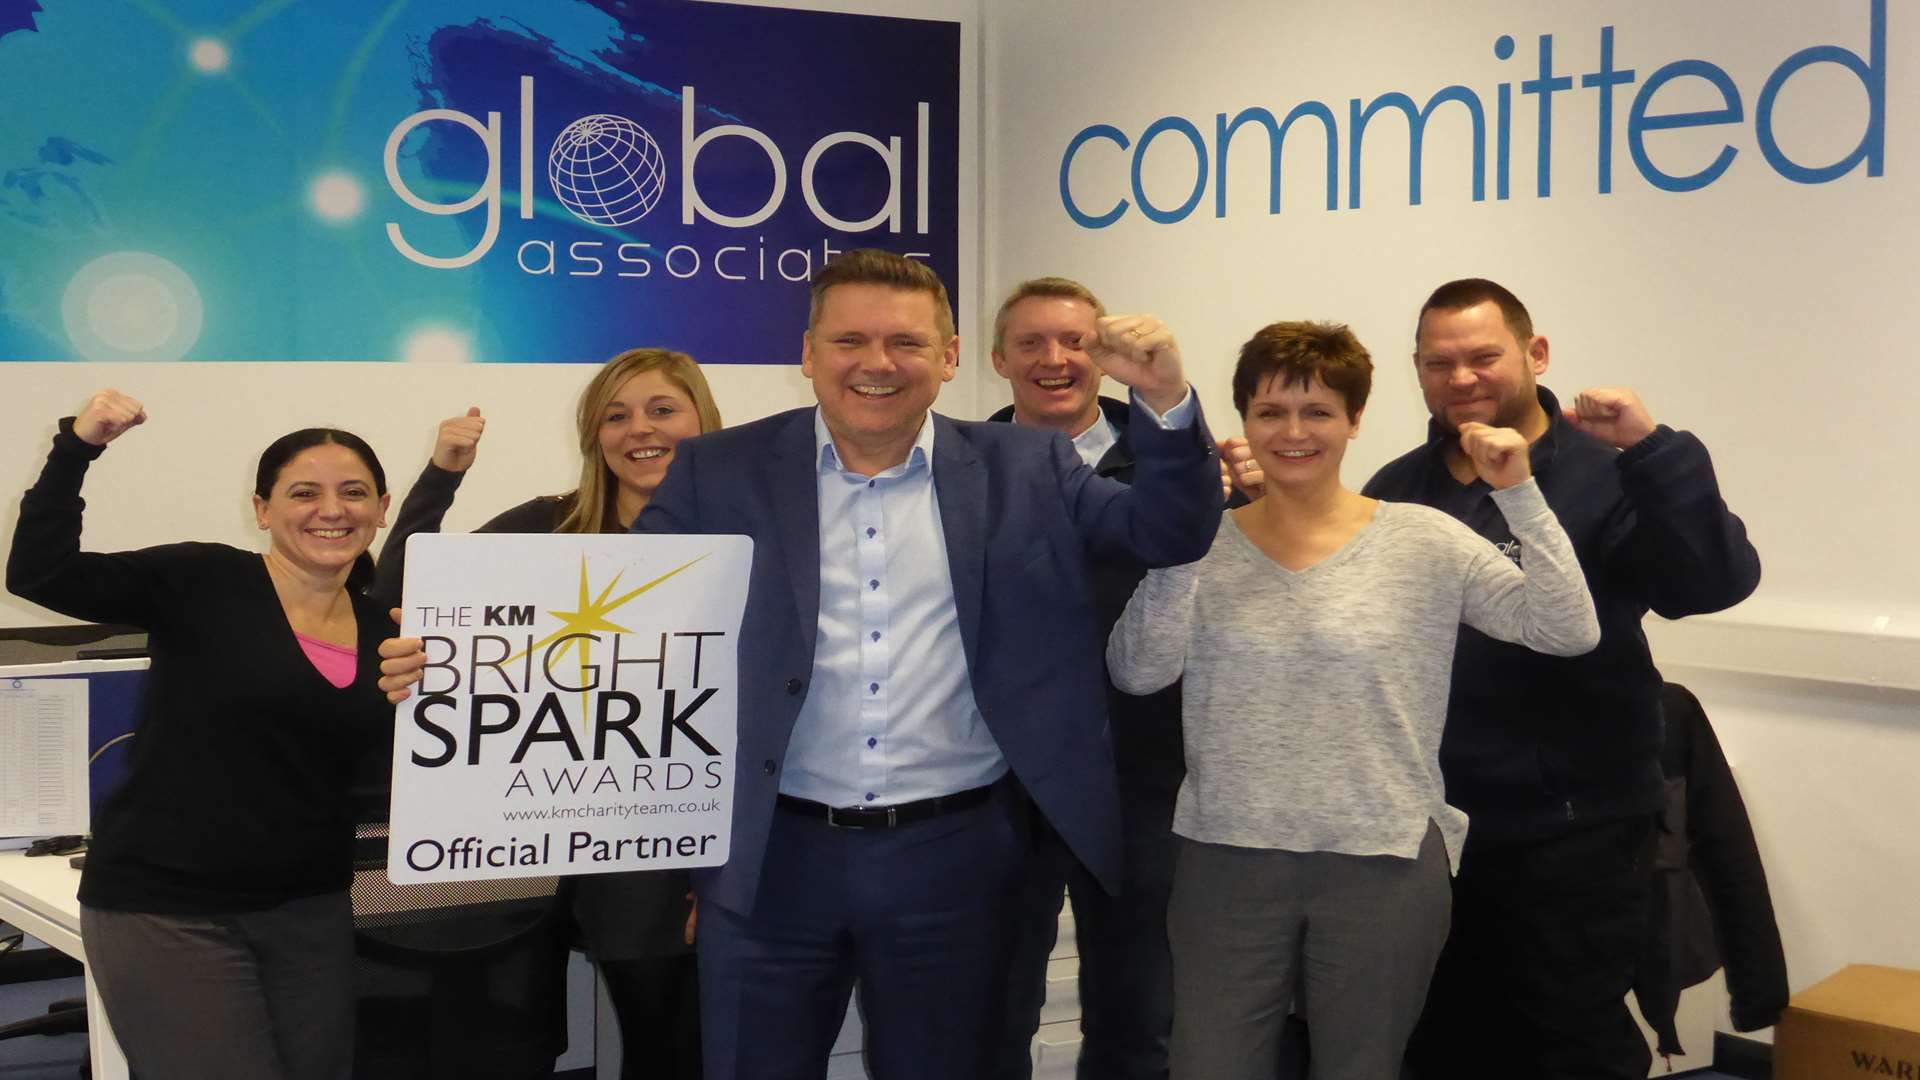 Paul Wetherfield of Global Associates announces support of the KM Bright Spark Awards